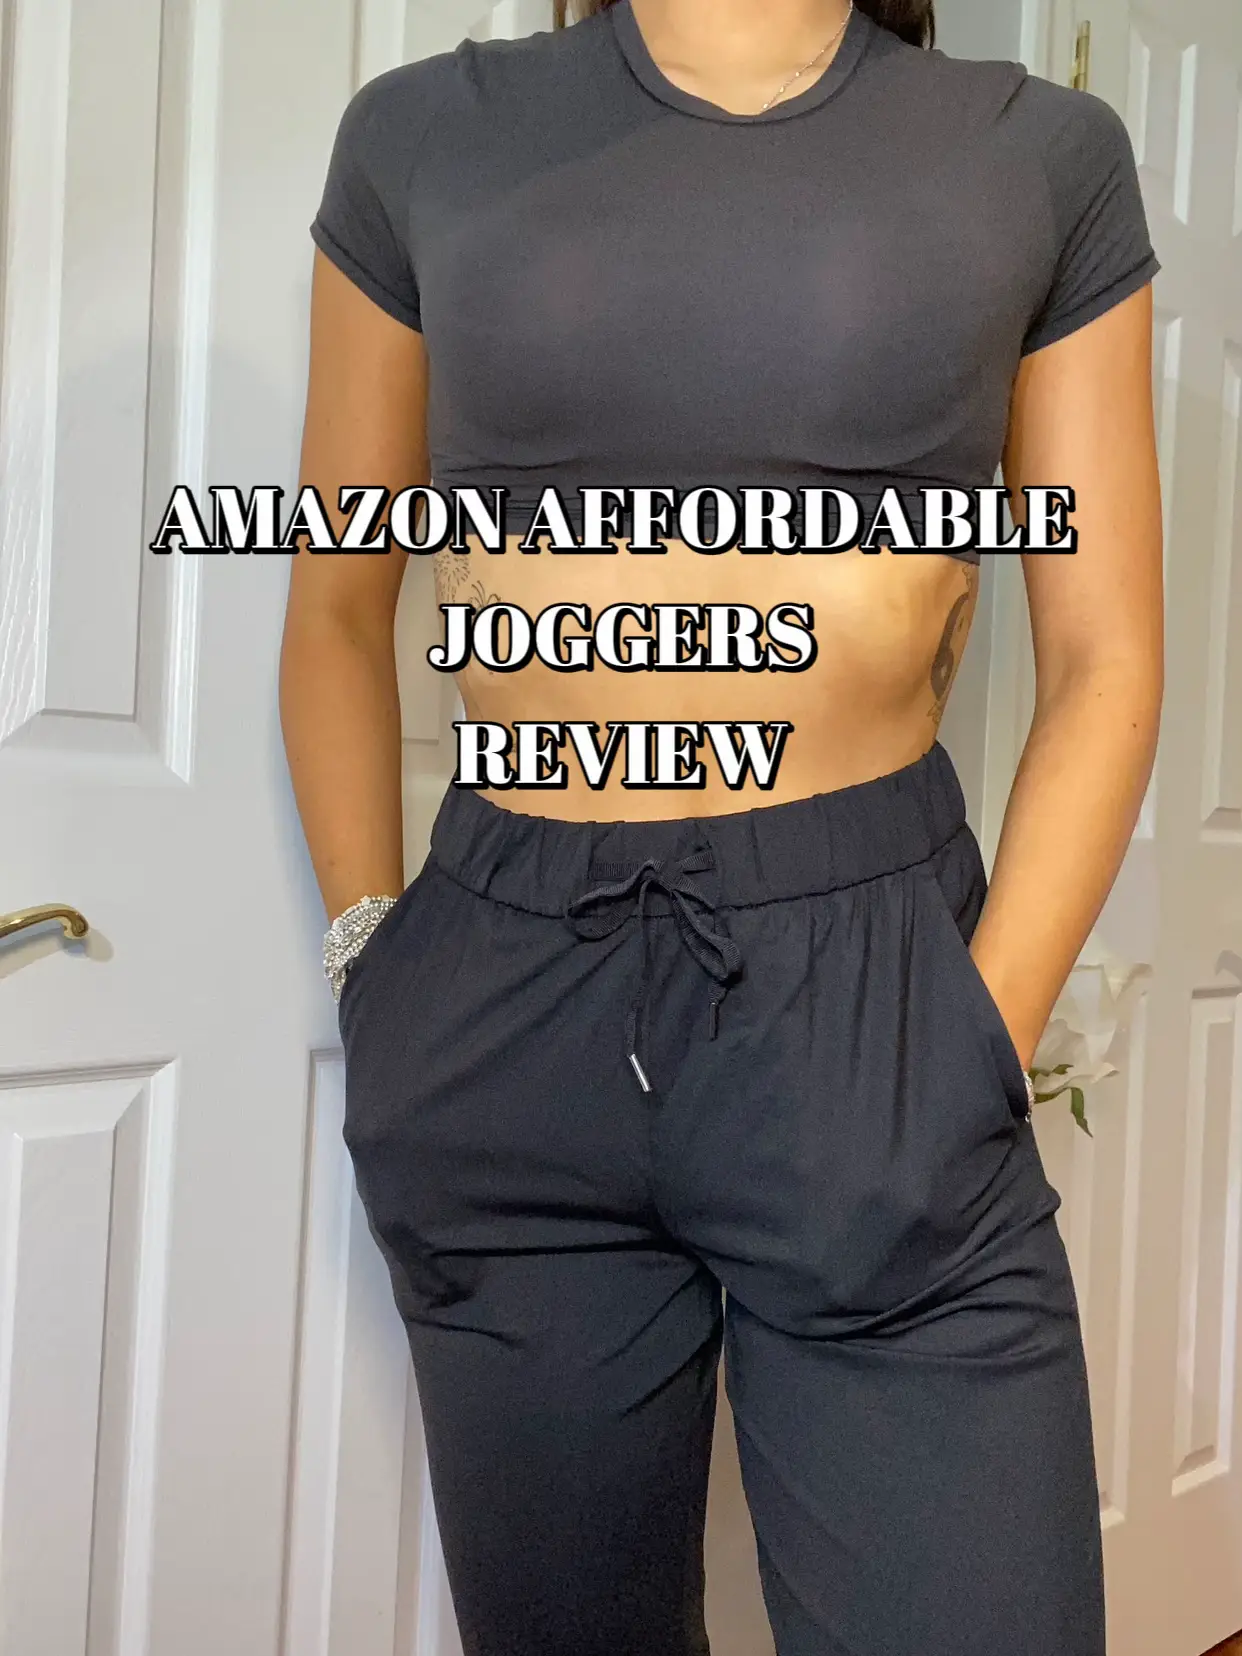 align jogger look alike for half the price 🫶🏽 linked in my storefron, Joggers